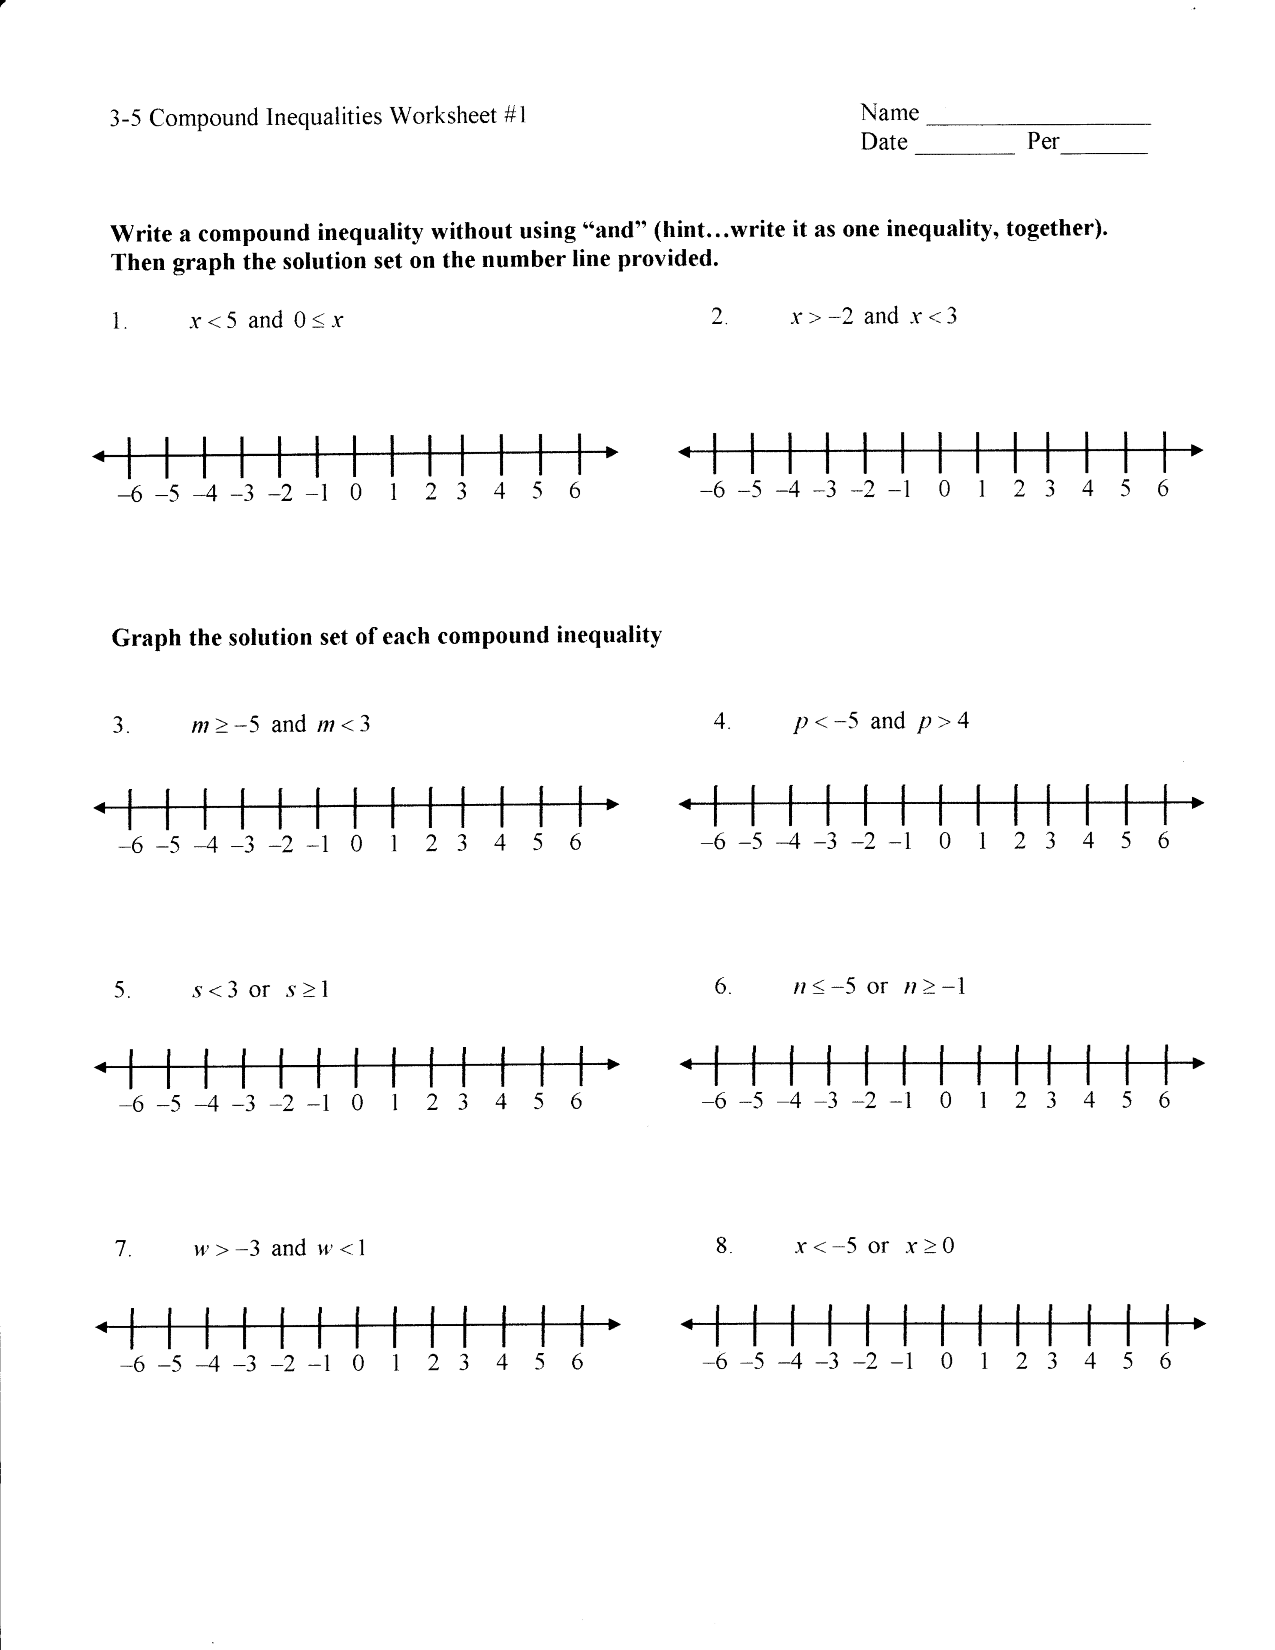 Solve And Graph Inequalities Worksheet